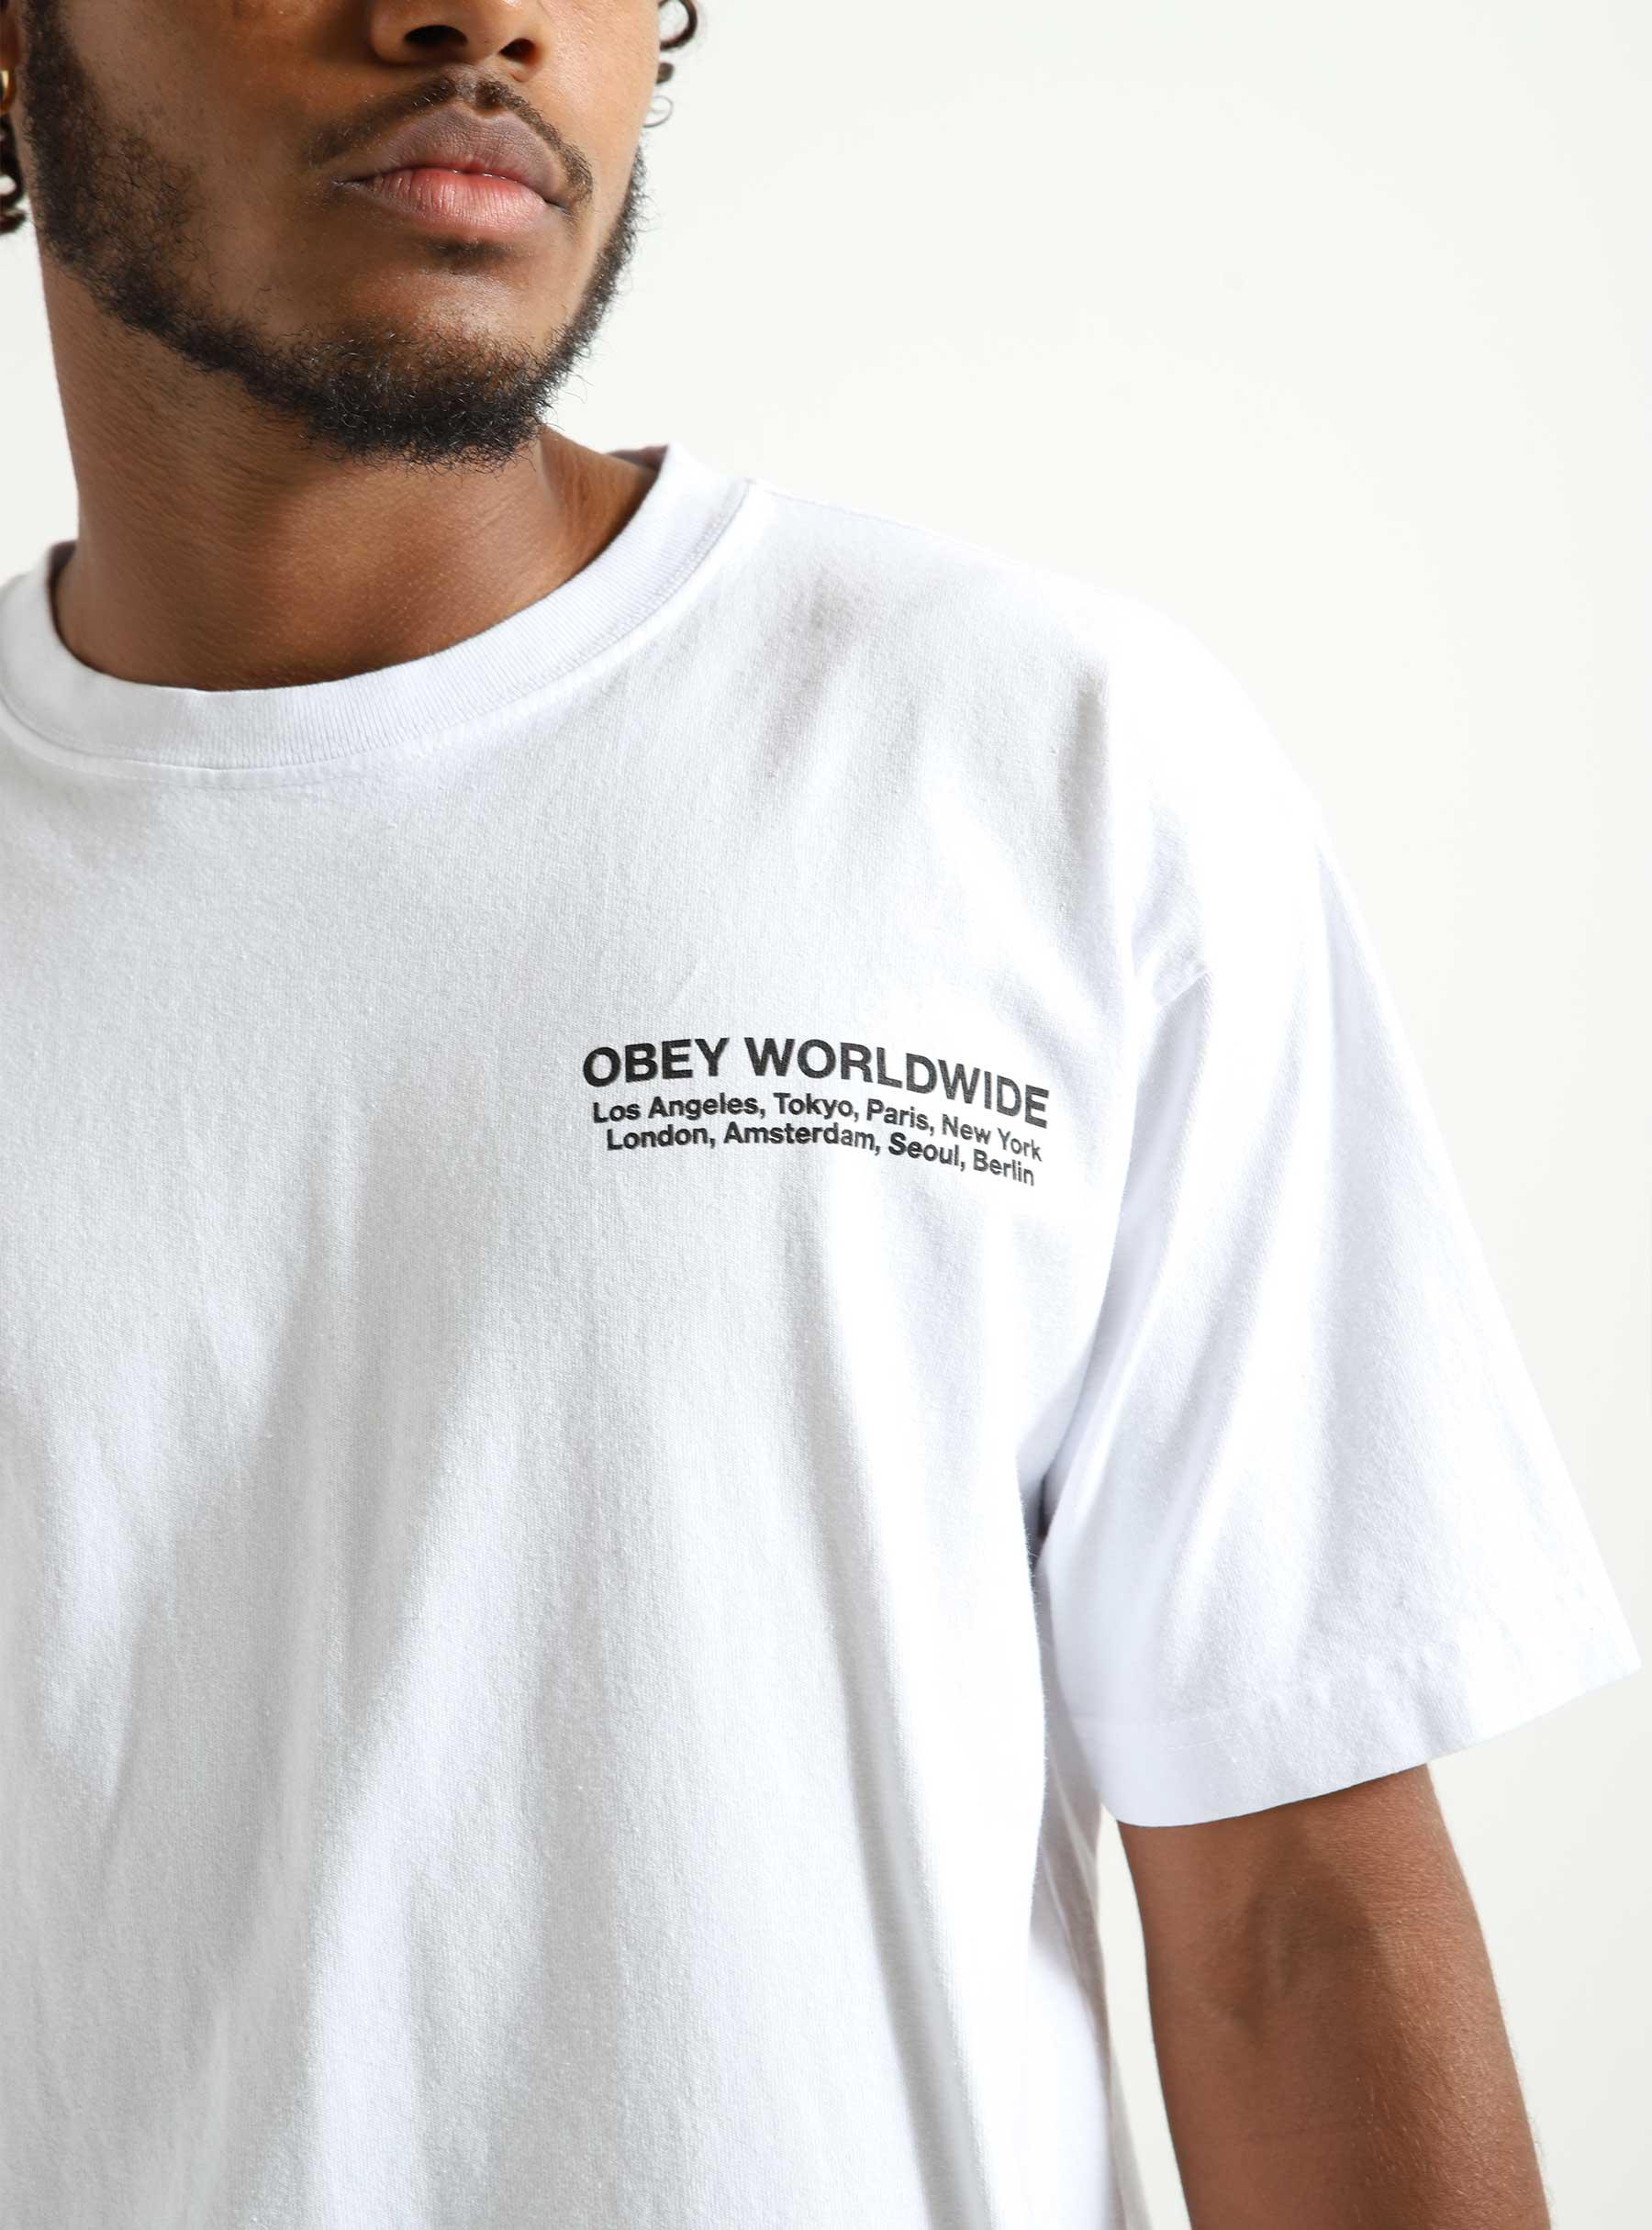 Obey Worldwide Cities T-shirt White 166913572-WHT